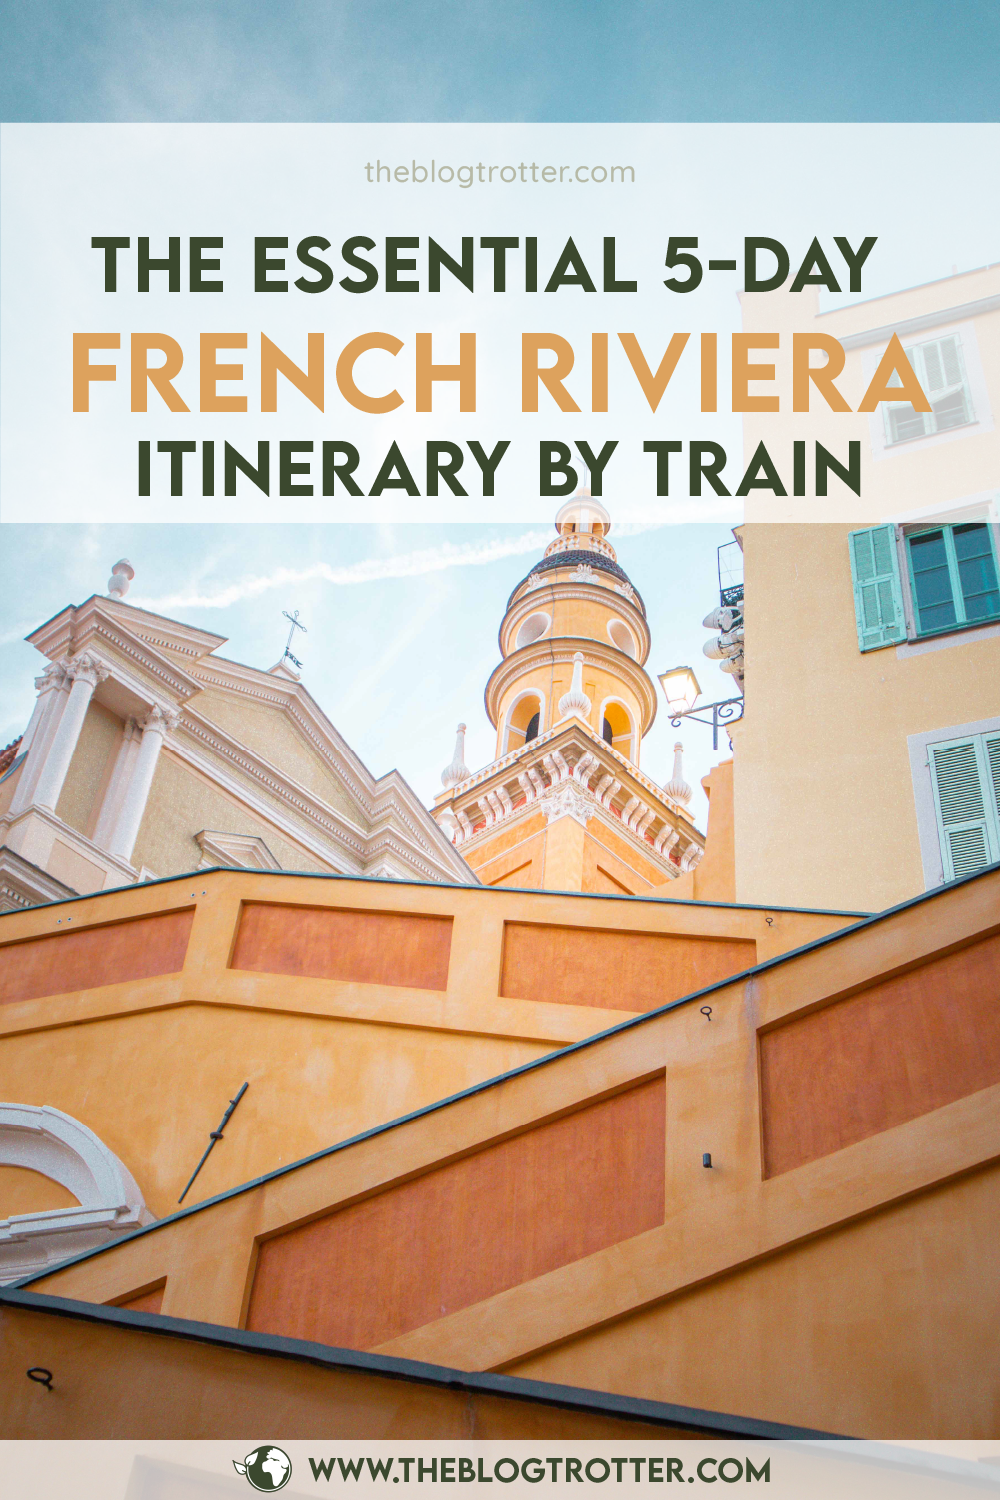 French riviera itinerary article visual for Pinterest - Option 3